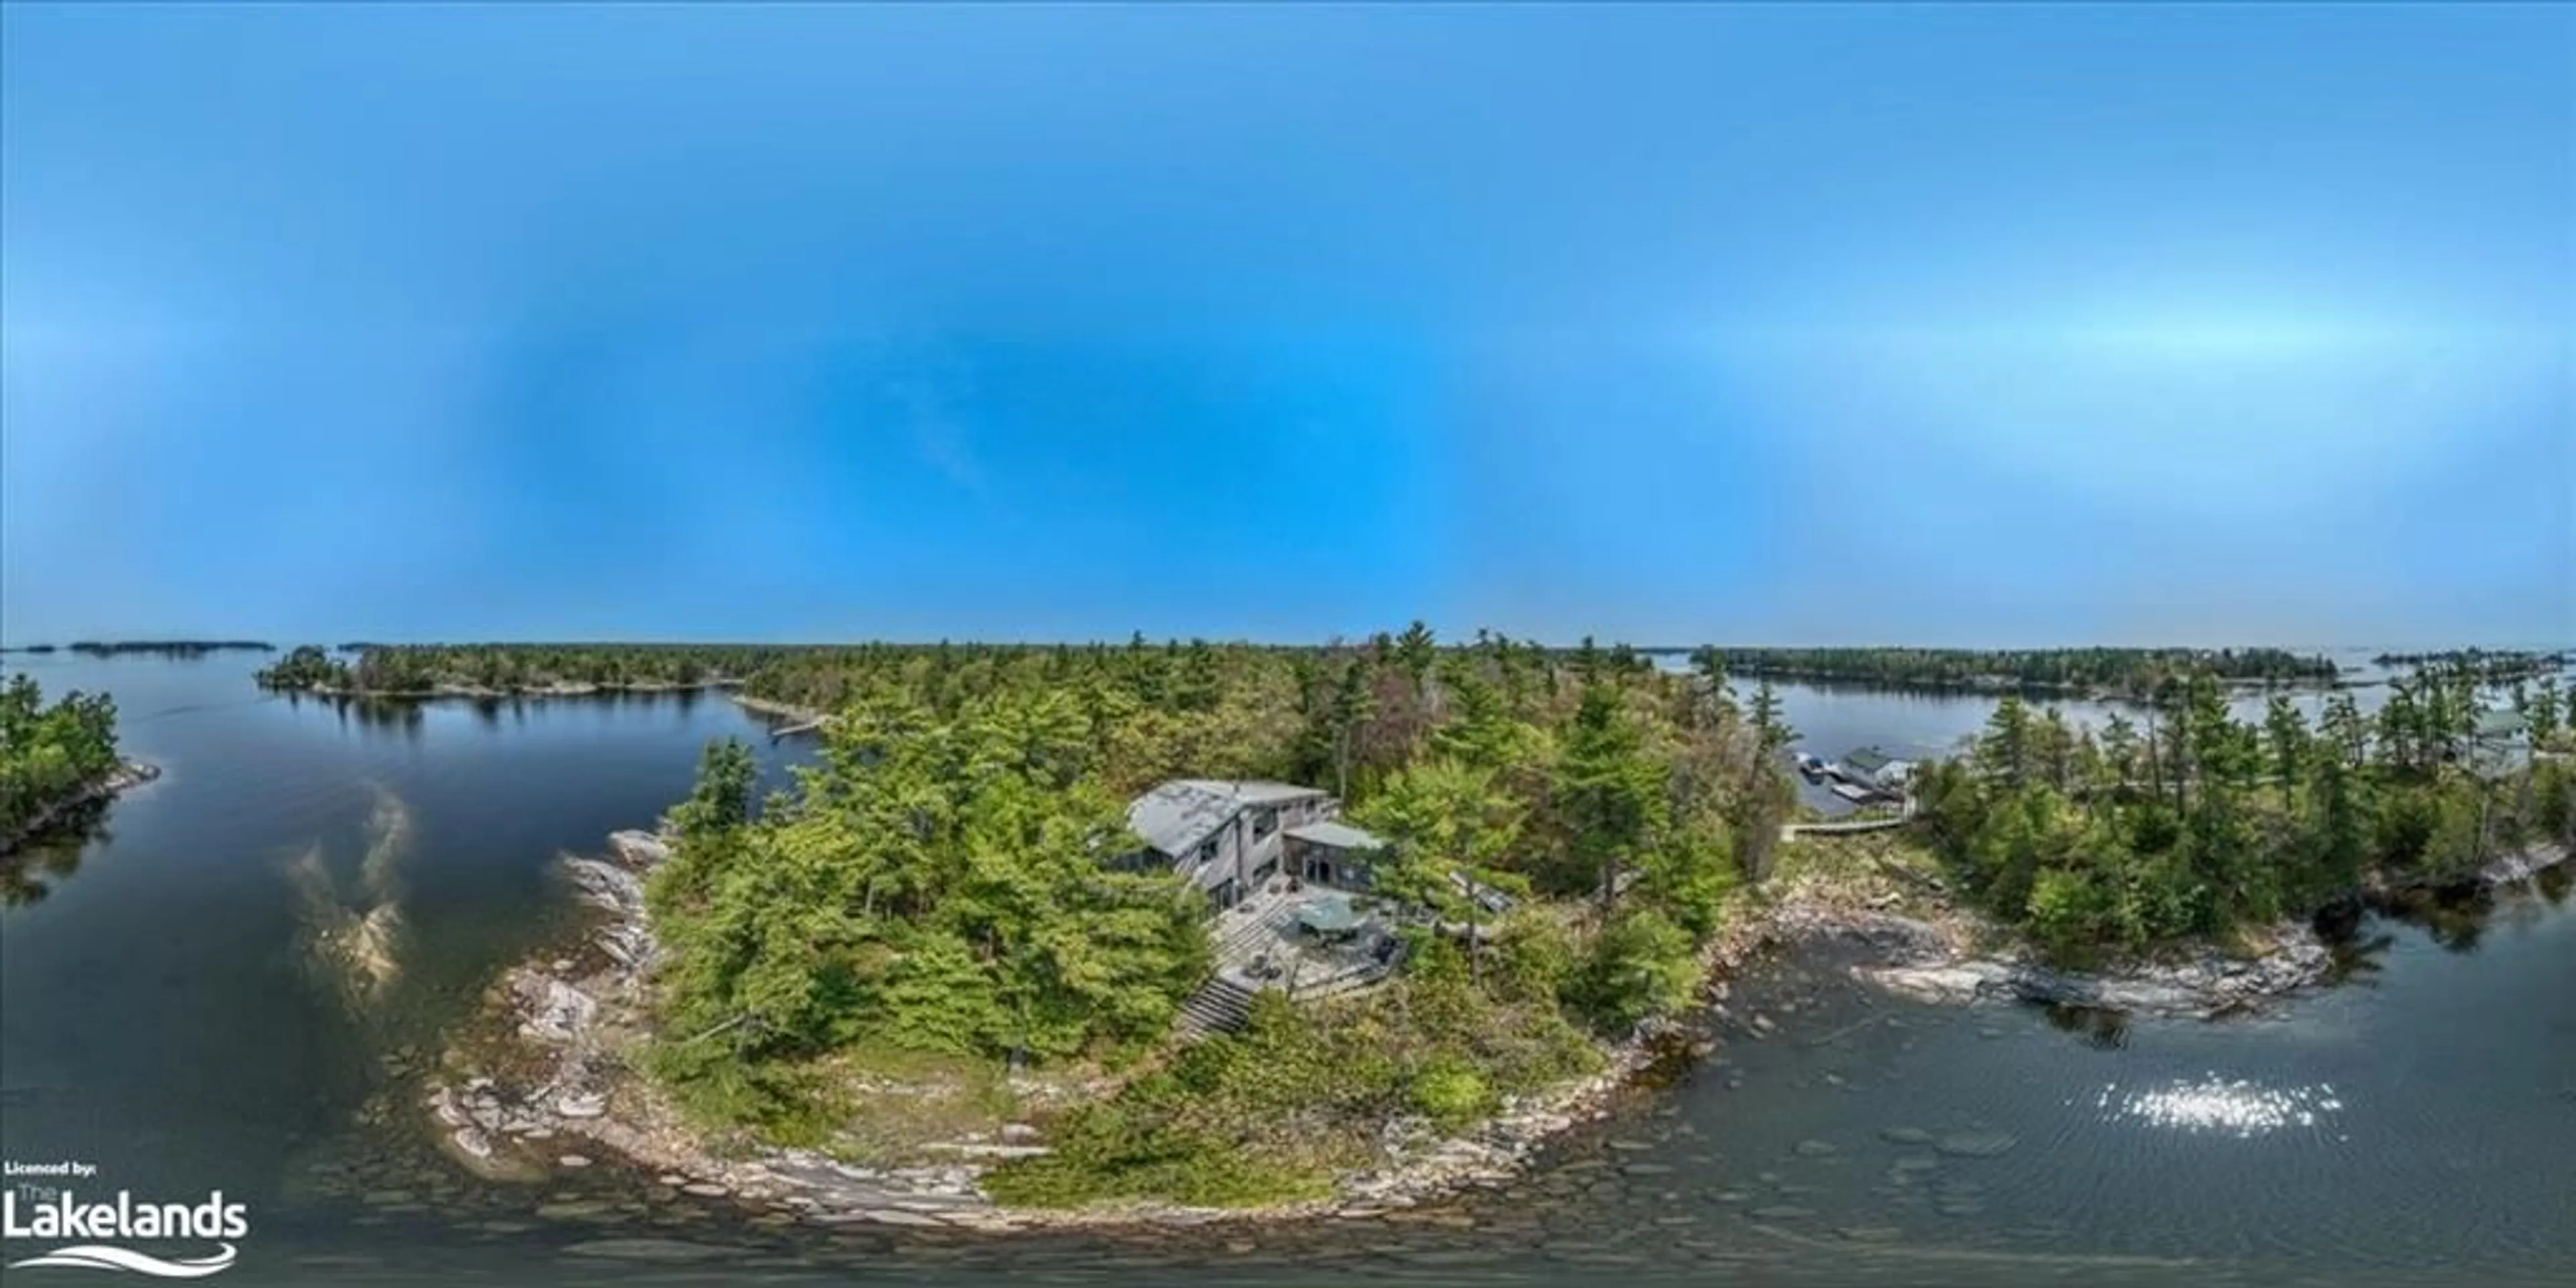 Lakeview for 1 Gb466 Island, Parry Sound Ontario P0G 1G0